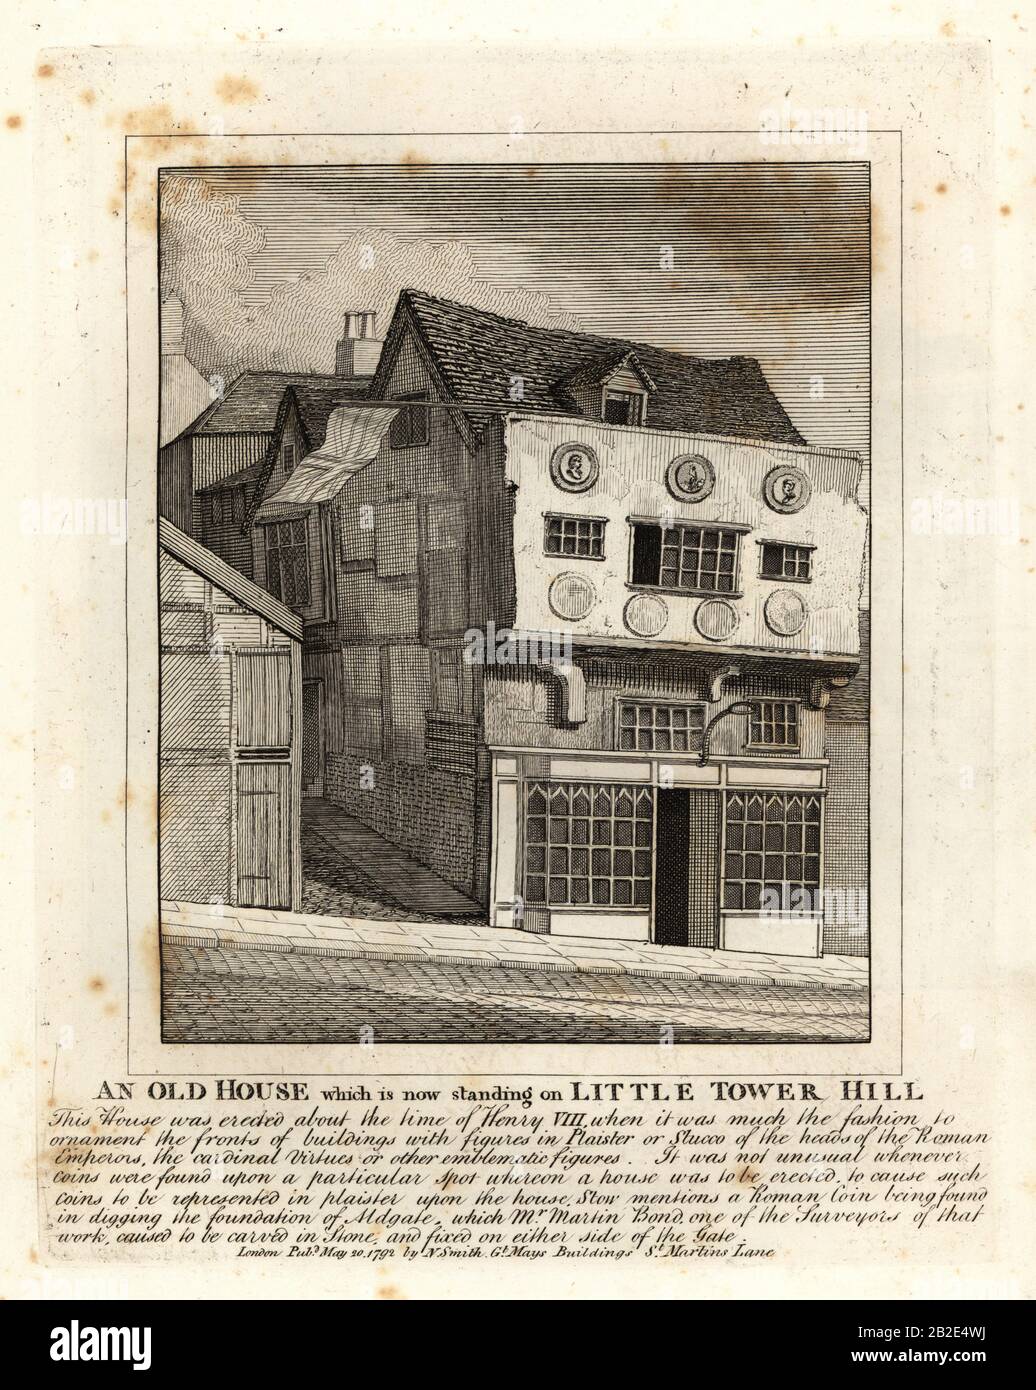 An old Tudor house standing on Little Tower Hill, London. Built in the time of Henry VIII with heads of Roman Emperors in plaster or stucco on the front. Copperplate engraving by John Thomas Smith after original drawings by members of the Society of Antiquaries from his J.T. Smith’s Antiquities of London and its Environs, J. Sewell, R. Folder, J. Simco, London, 1792. Stock Photo